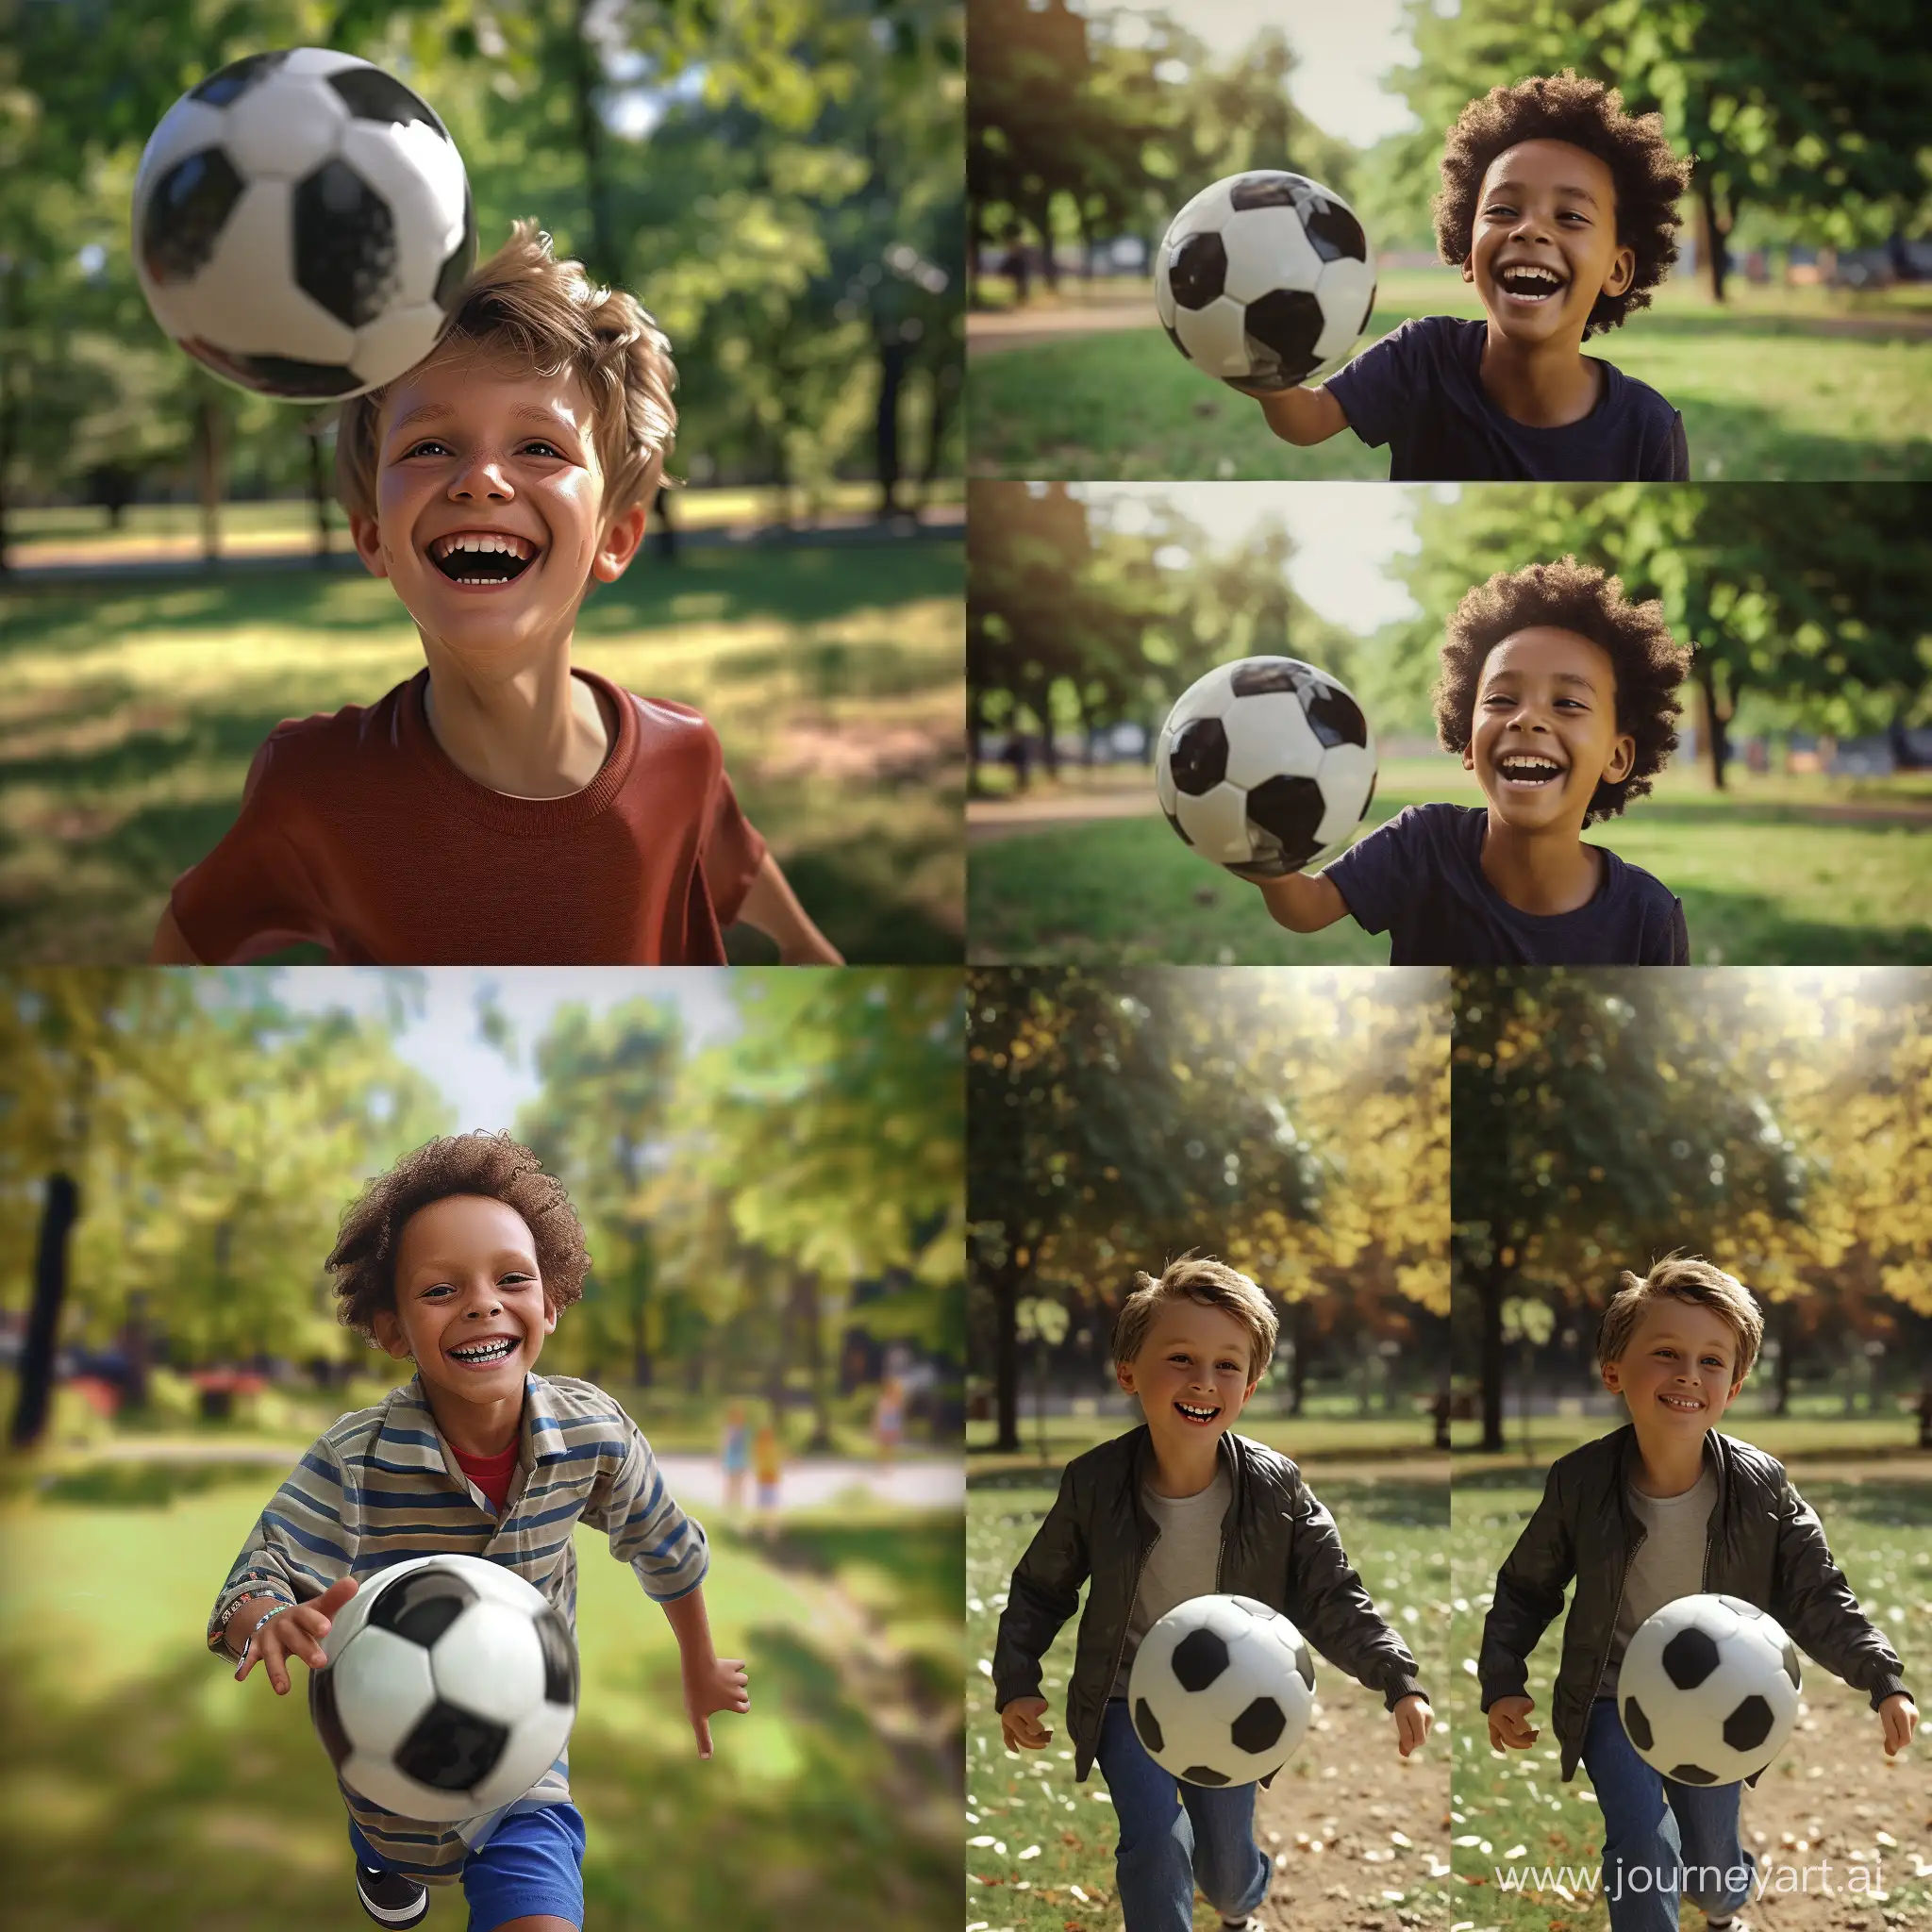 Smiling-10YearOld-Kid-Playing-Football-in-Park